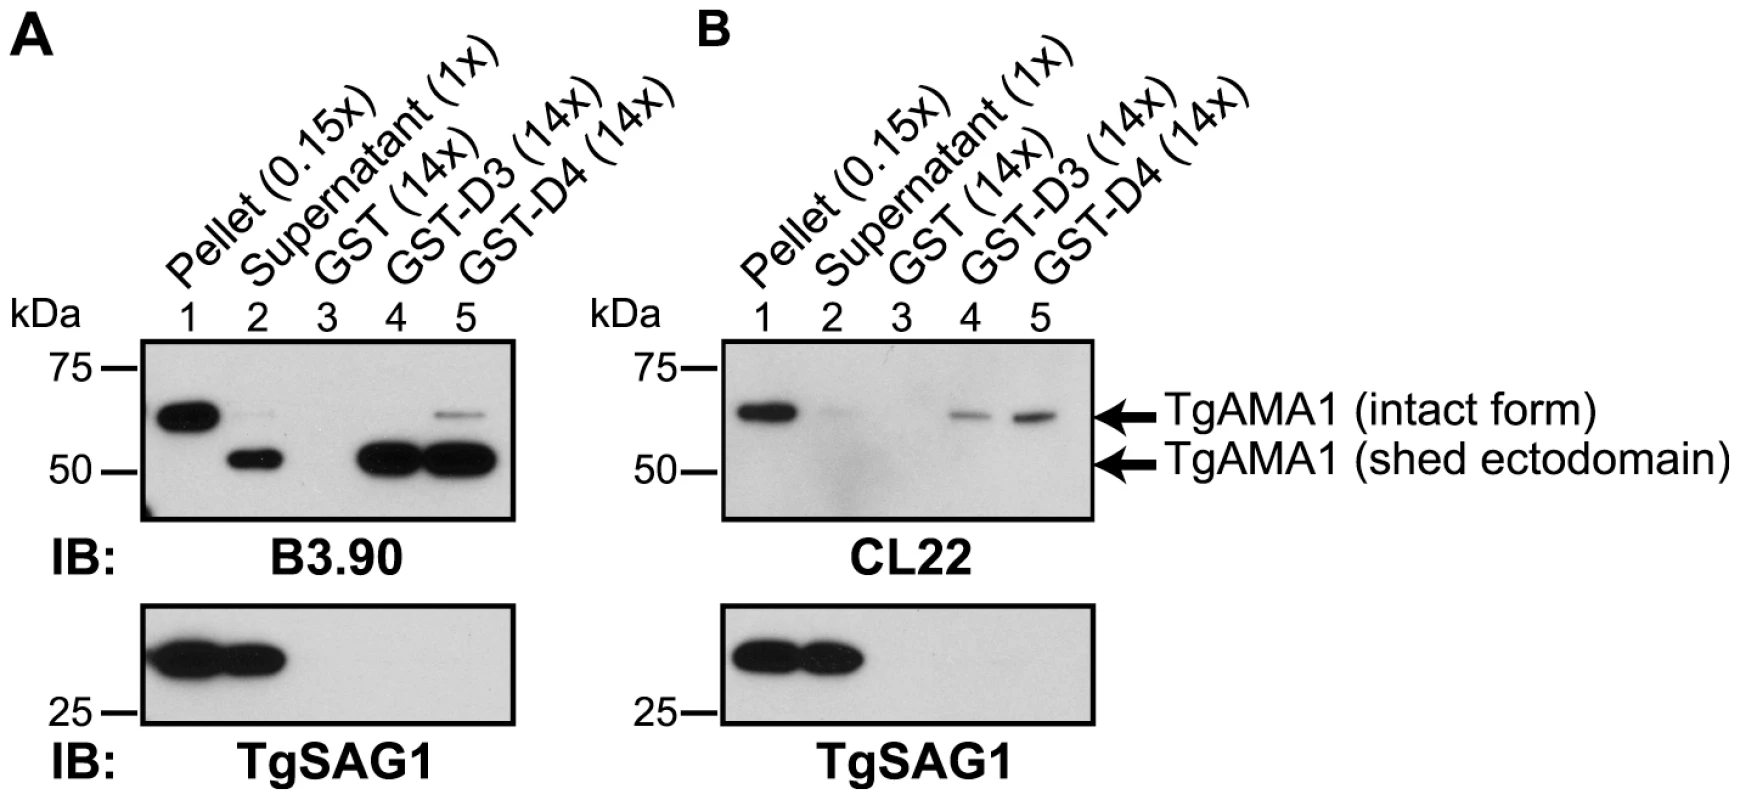 TgRON2 fusions GST-D3 and GST-D4 independently and specifically interact with the shed ectodomain of TgAMA1.